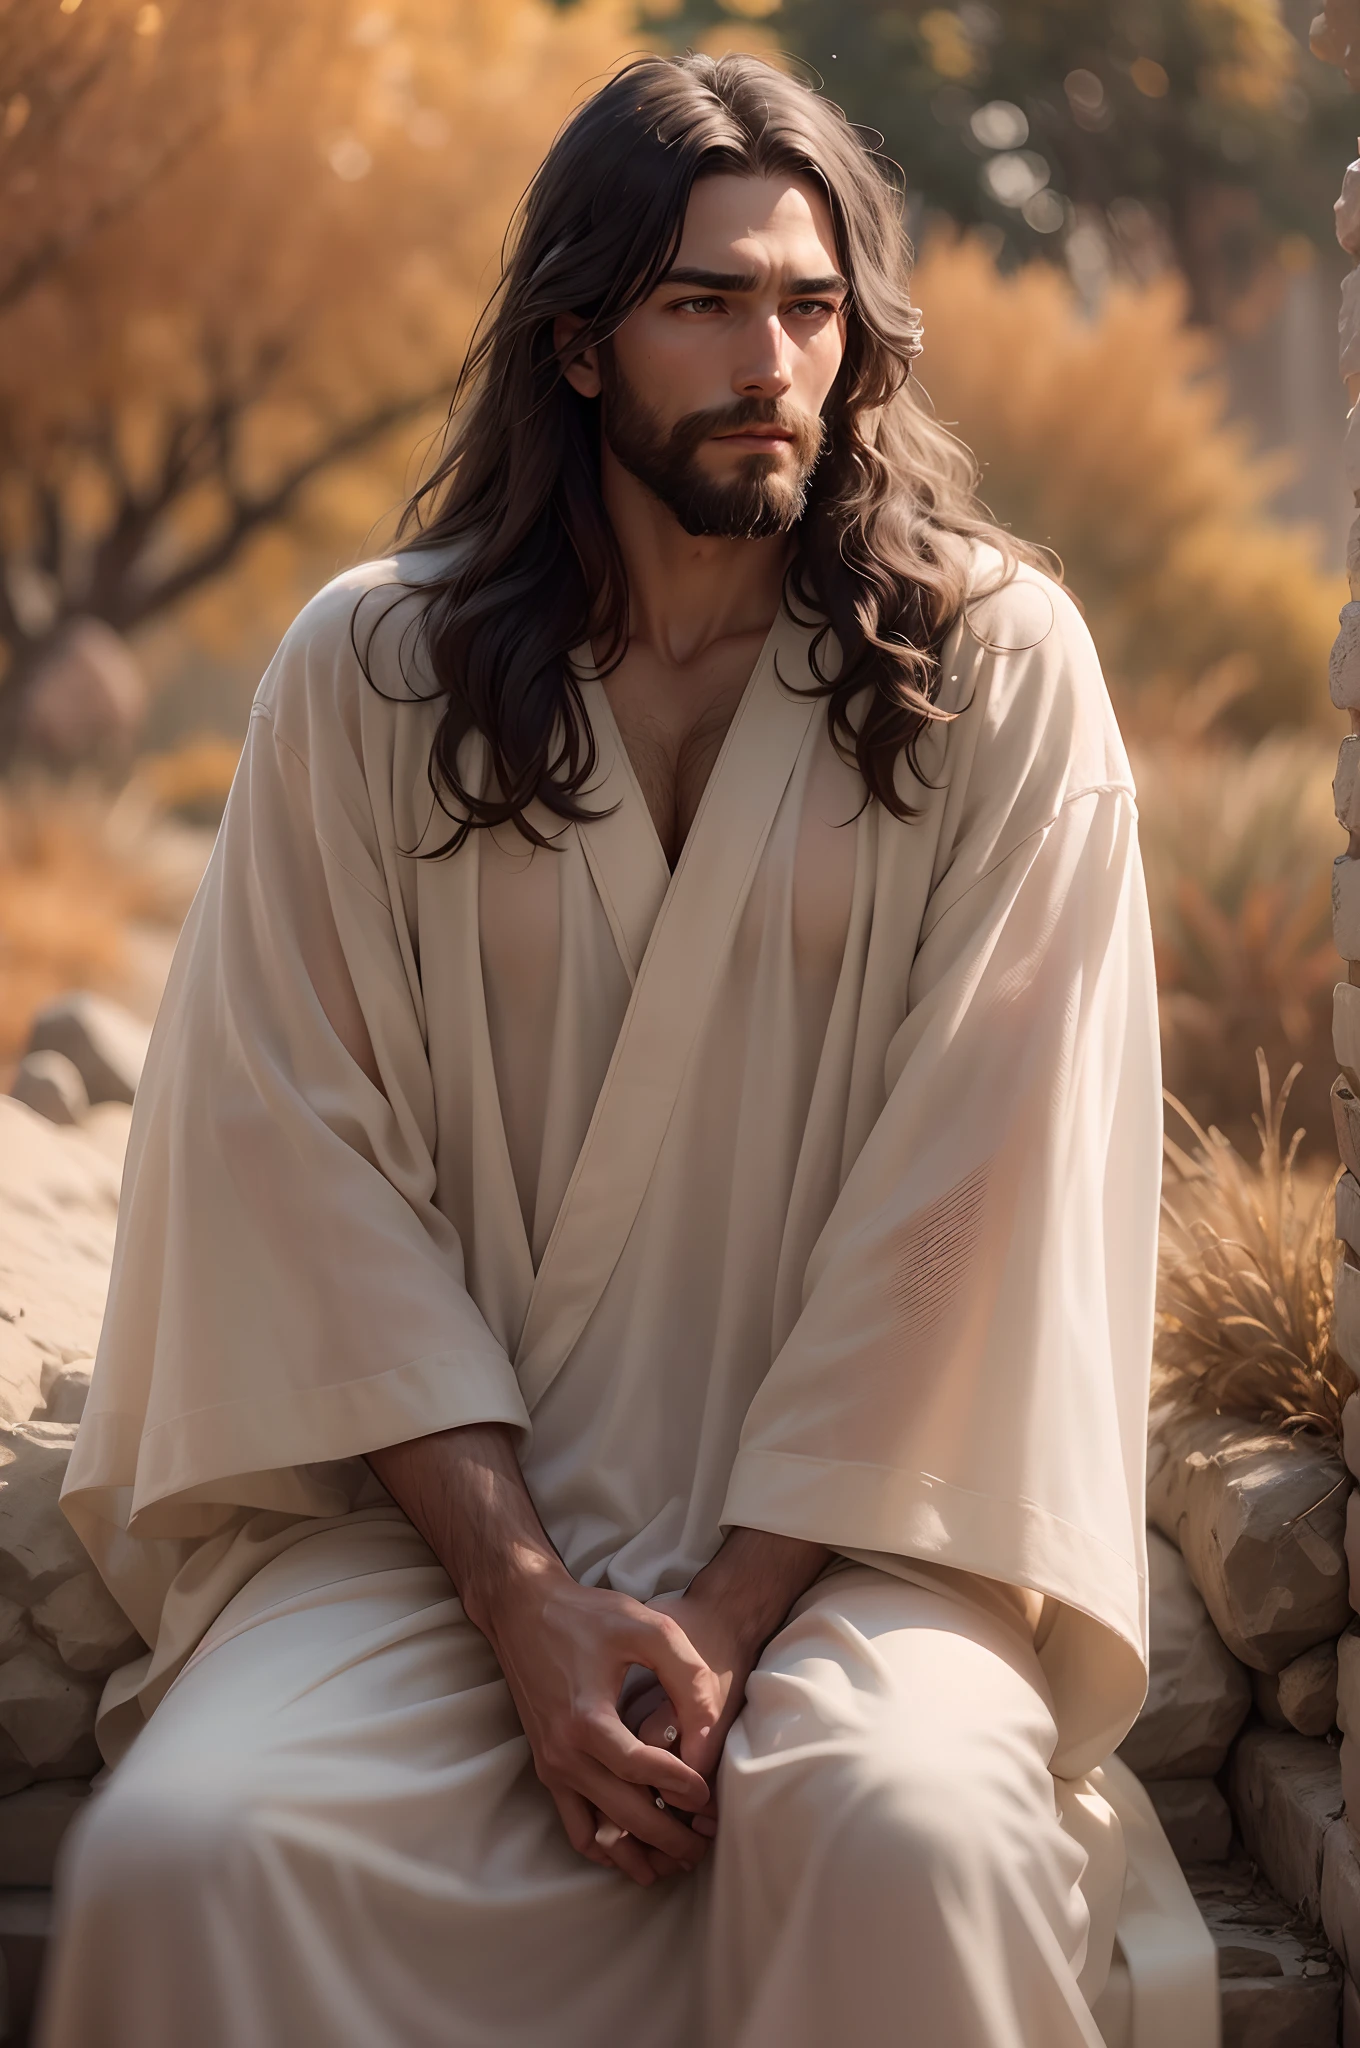 Raw Pictures of Jesus、Raw Pictures of Jesus Christ、
(symmetry)、central、((Close))Upportrait、(Jesus)、Raw photo of a very thin Caucasian man with long hair and beard、、Raw photo of a long white robe、35 mm、Natural Skin、clothes details、8K textures、8K、insane detail、intricate-detail、Ultra detailed very detailed、realisticlying、Soft Cinematic Lights、nffsw、foco nítido、((((Cinematic Look))))、Convoluted、elegent、extremely details CG、High-resolution RAW photos、High Dynamic Range RAW Photos、8K raw photos、8K resolution raw photos、 Unity 8K wallpapers、Highly detailed CG、Raw photos of masterpieces、Realistic、Photorealistic、Three-dimensional、Beautiful and detailed、Depth、fine-textured、Glossy、Fully Focused、Crisp、realisticlying、